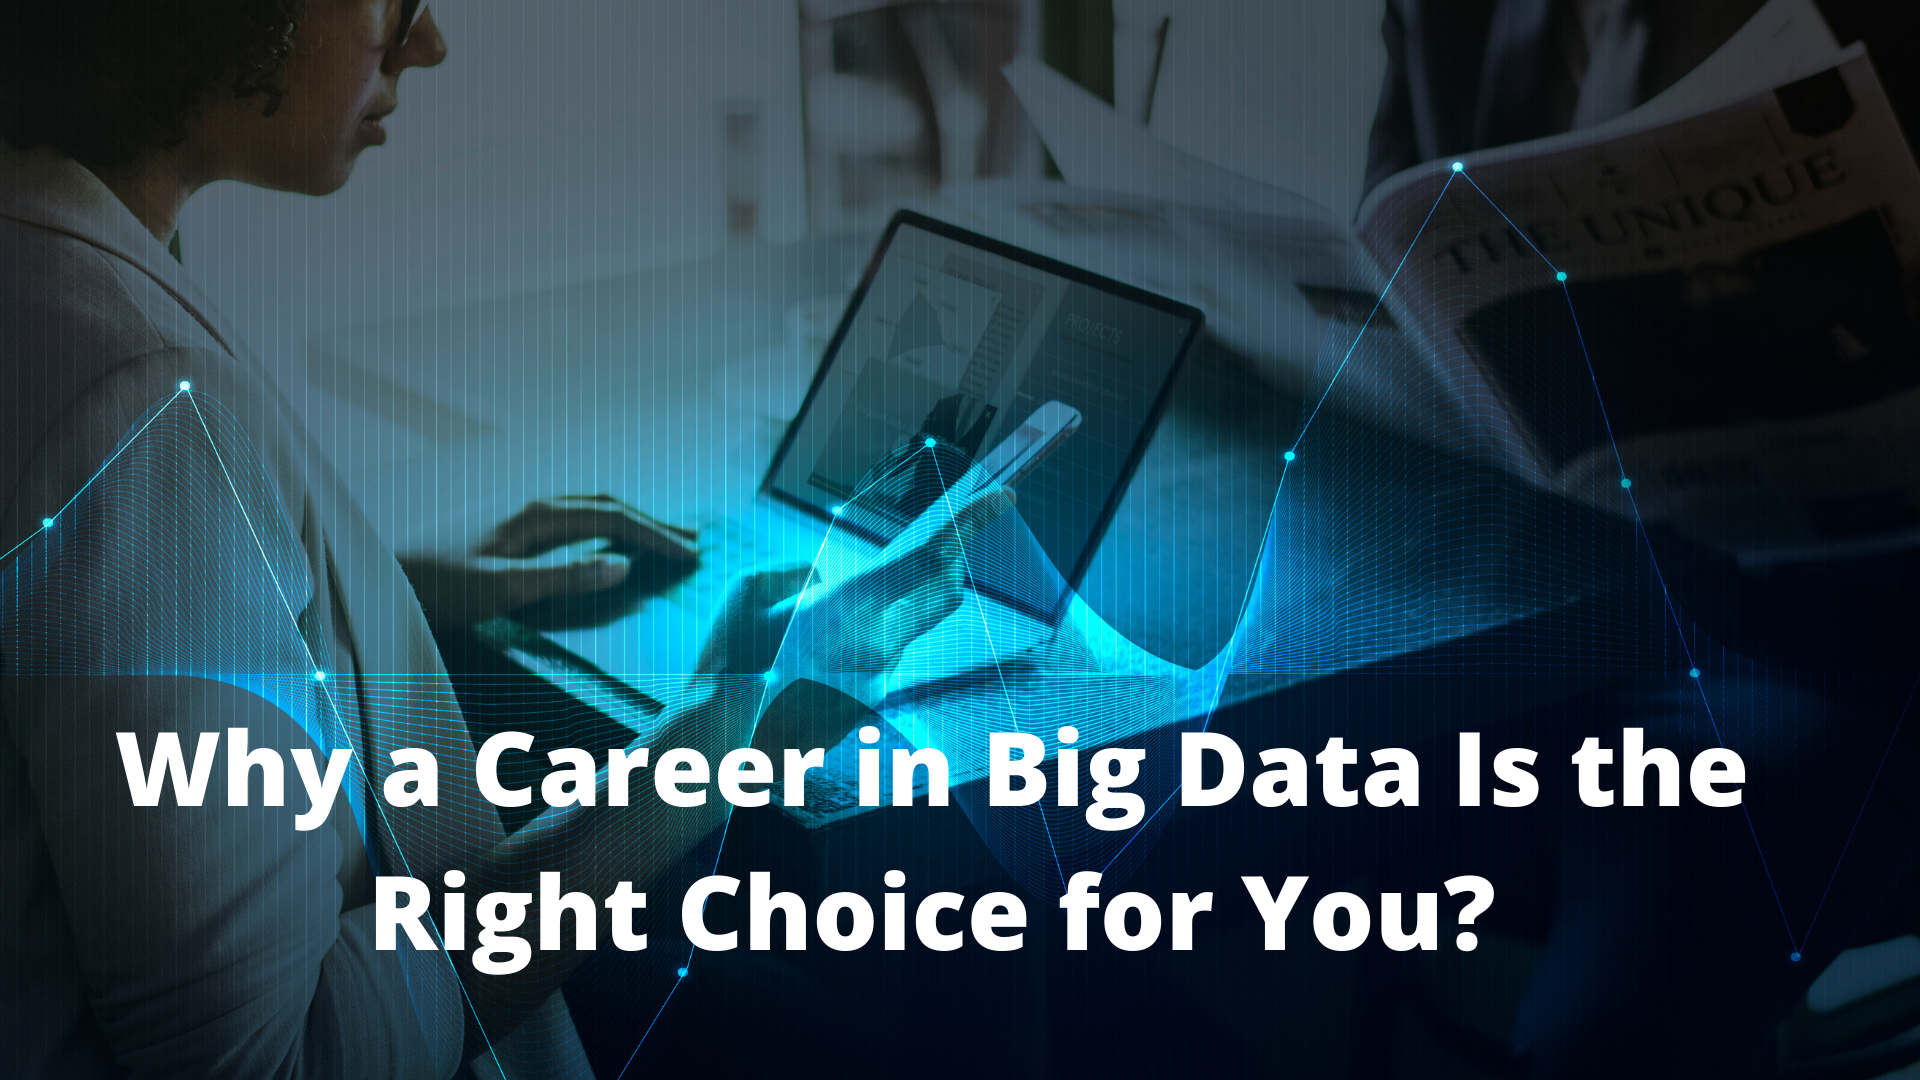 Why a Career in Big Data Is the Right Choice for You?